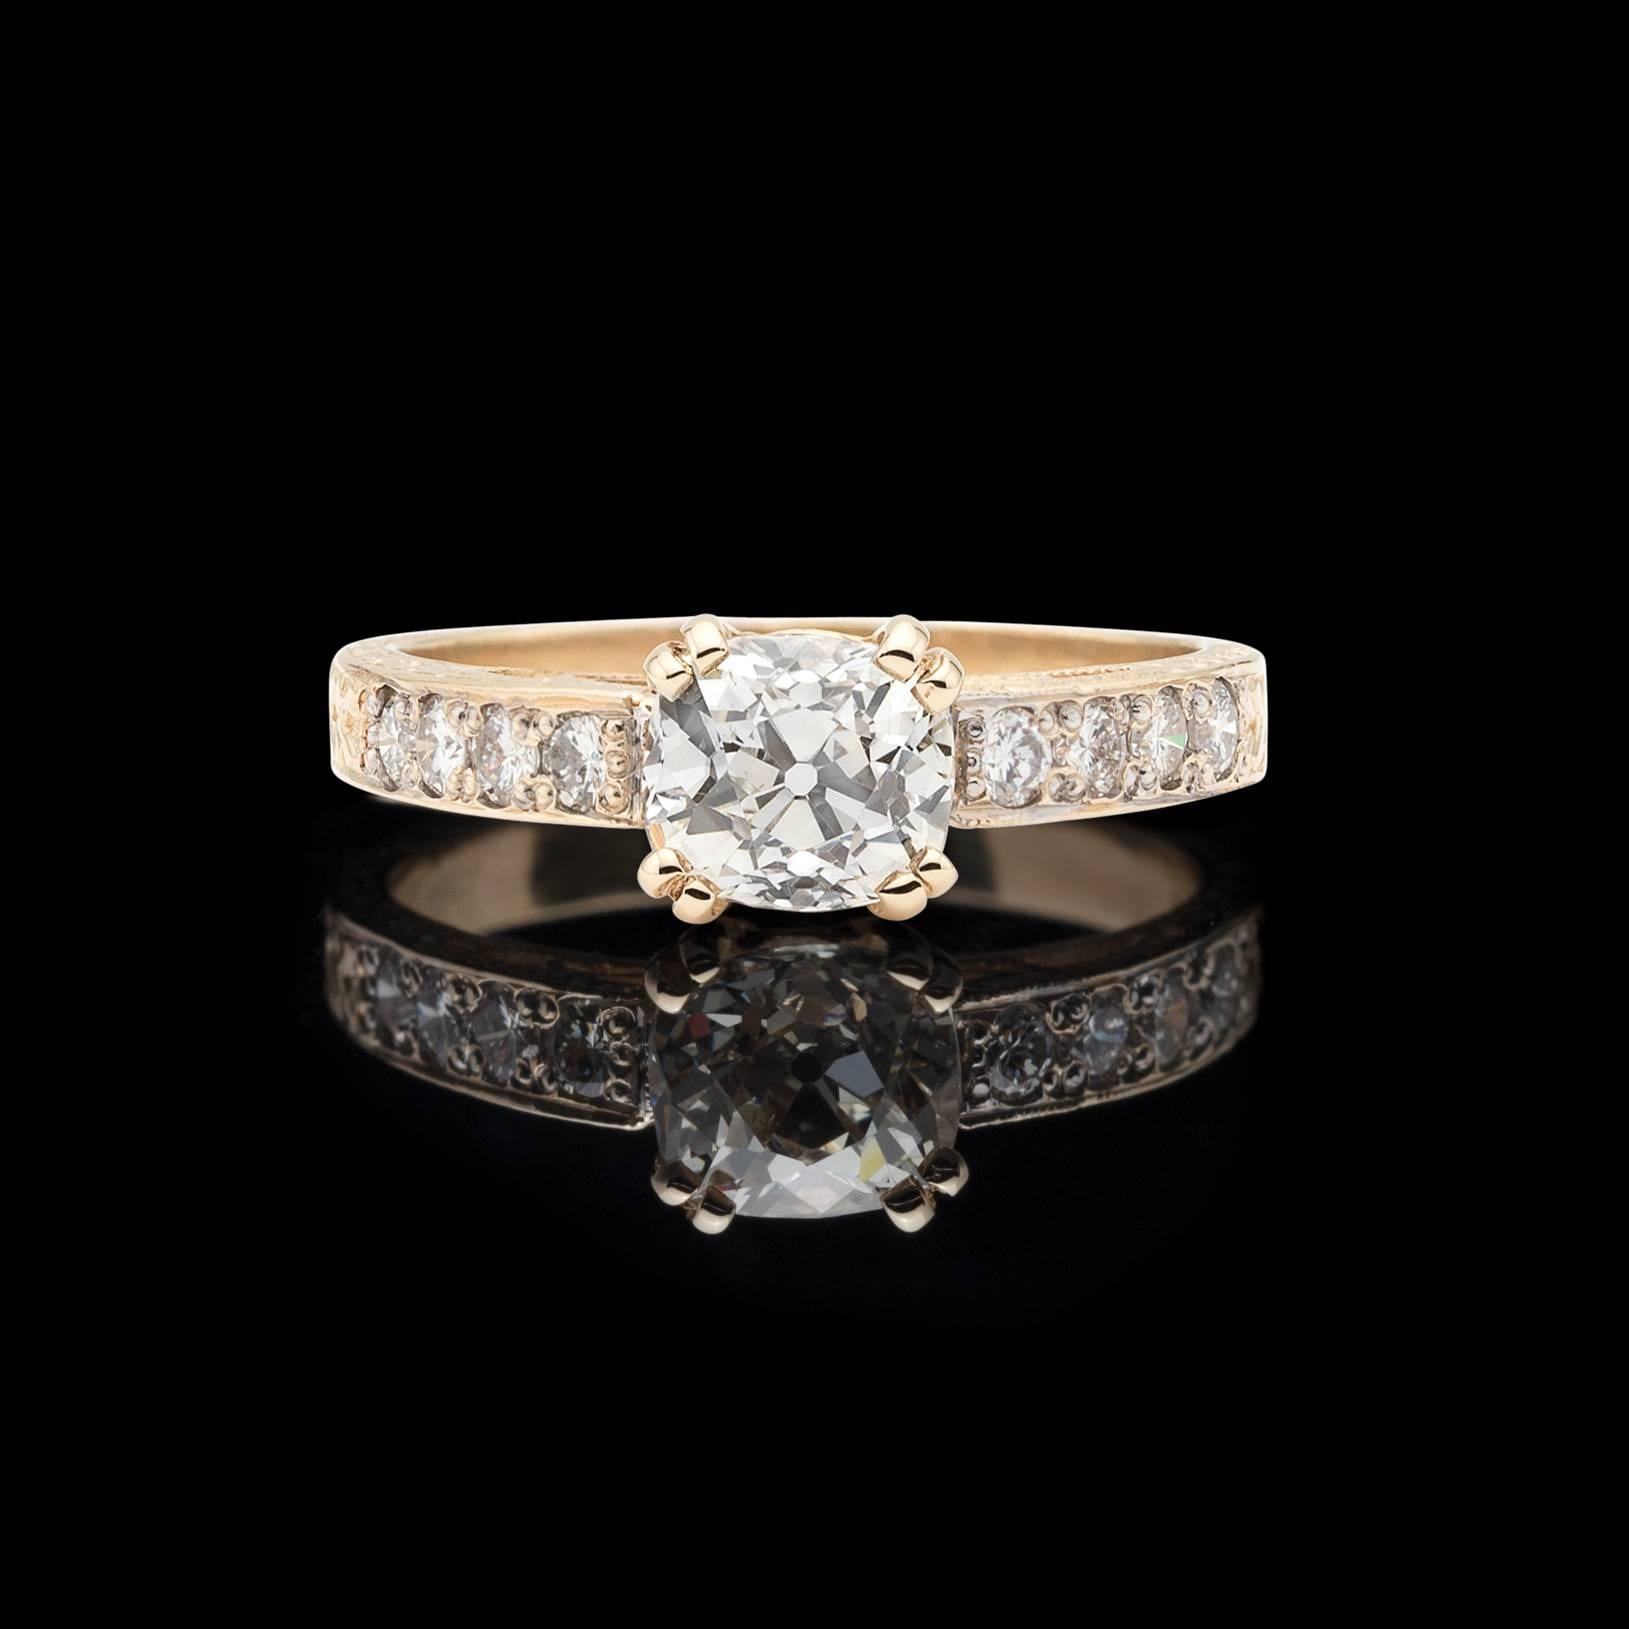 This gorgeous Old Mine Cut Diamond horizontally set in an eye catching 14kt Yellow Gold ring is as elegant as it is timeless. The center stone weighs 1.07 carats and comes with EGL report US905899207D which grades the diamond as I/VS2. This gorgeous